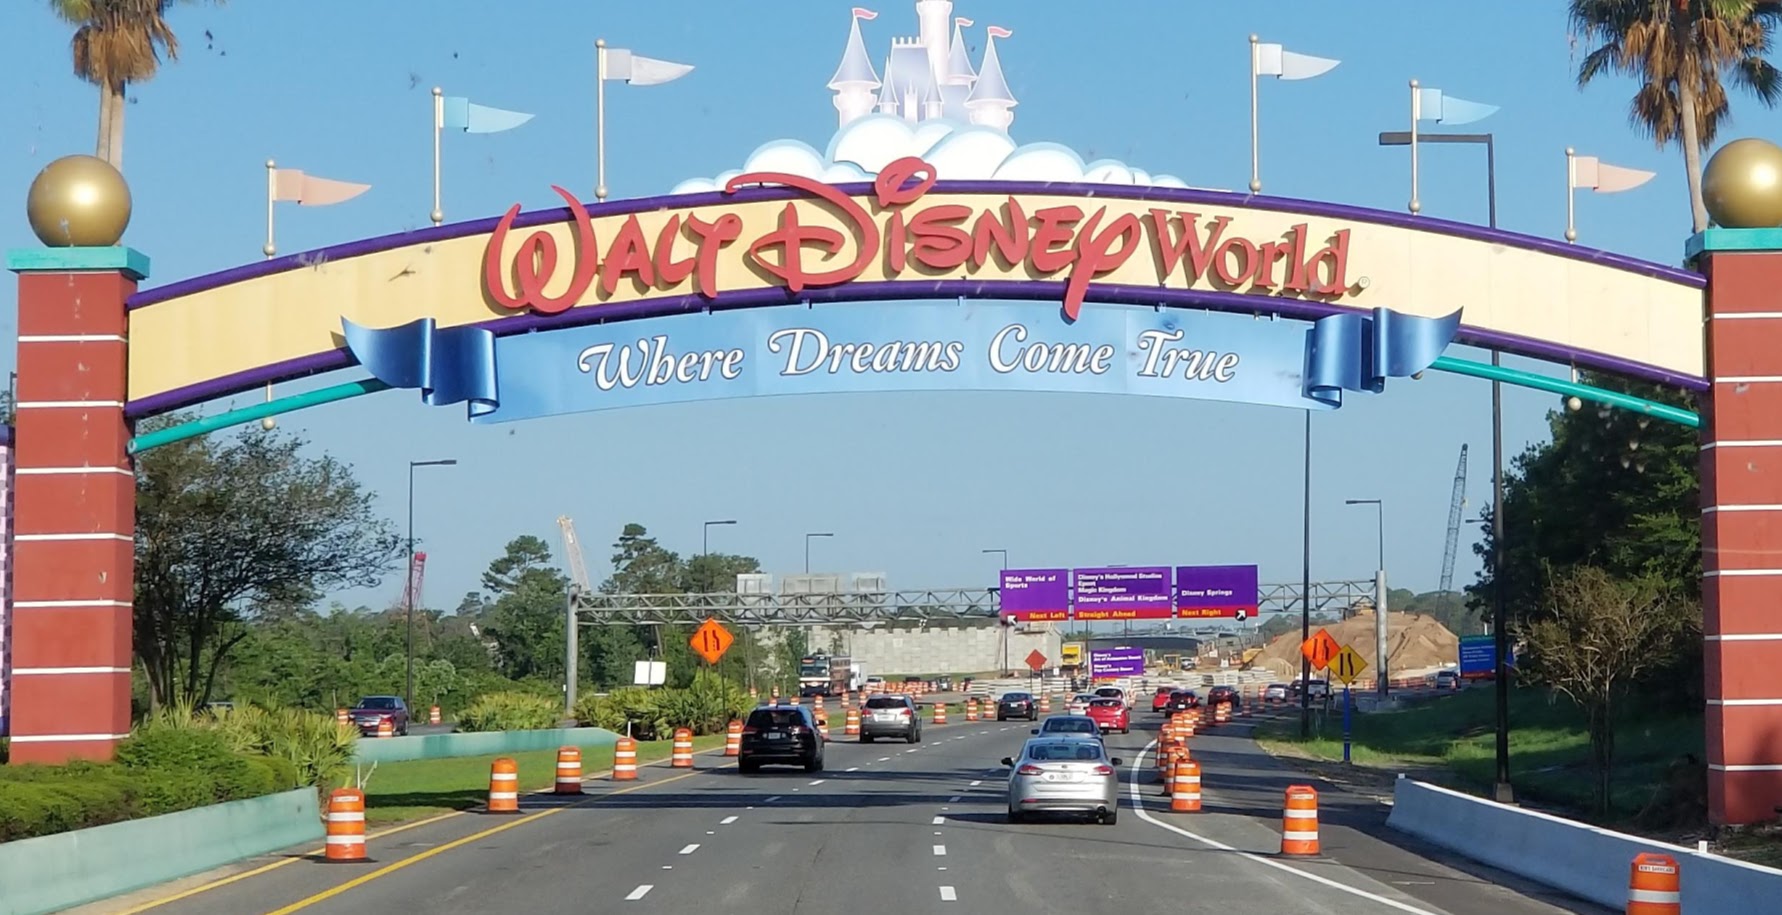 Disney VP States Reservation Availability Does Not Mean Parks Will Be Open